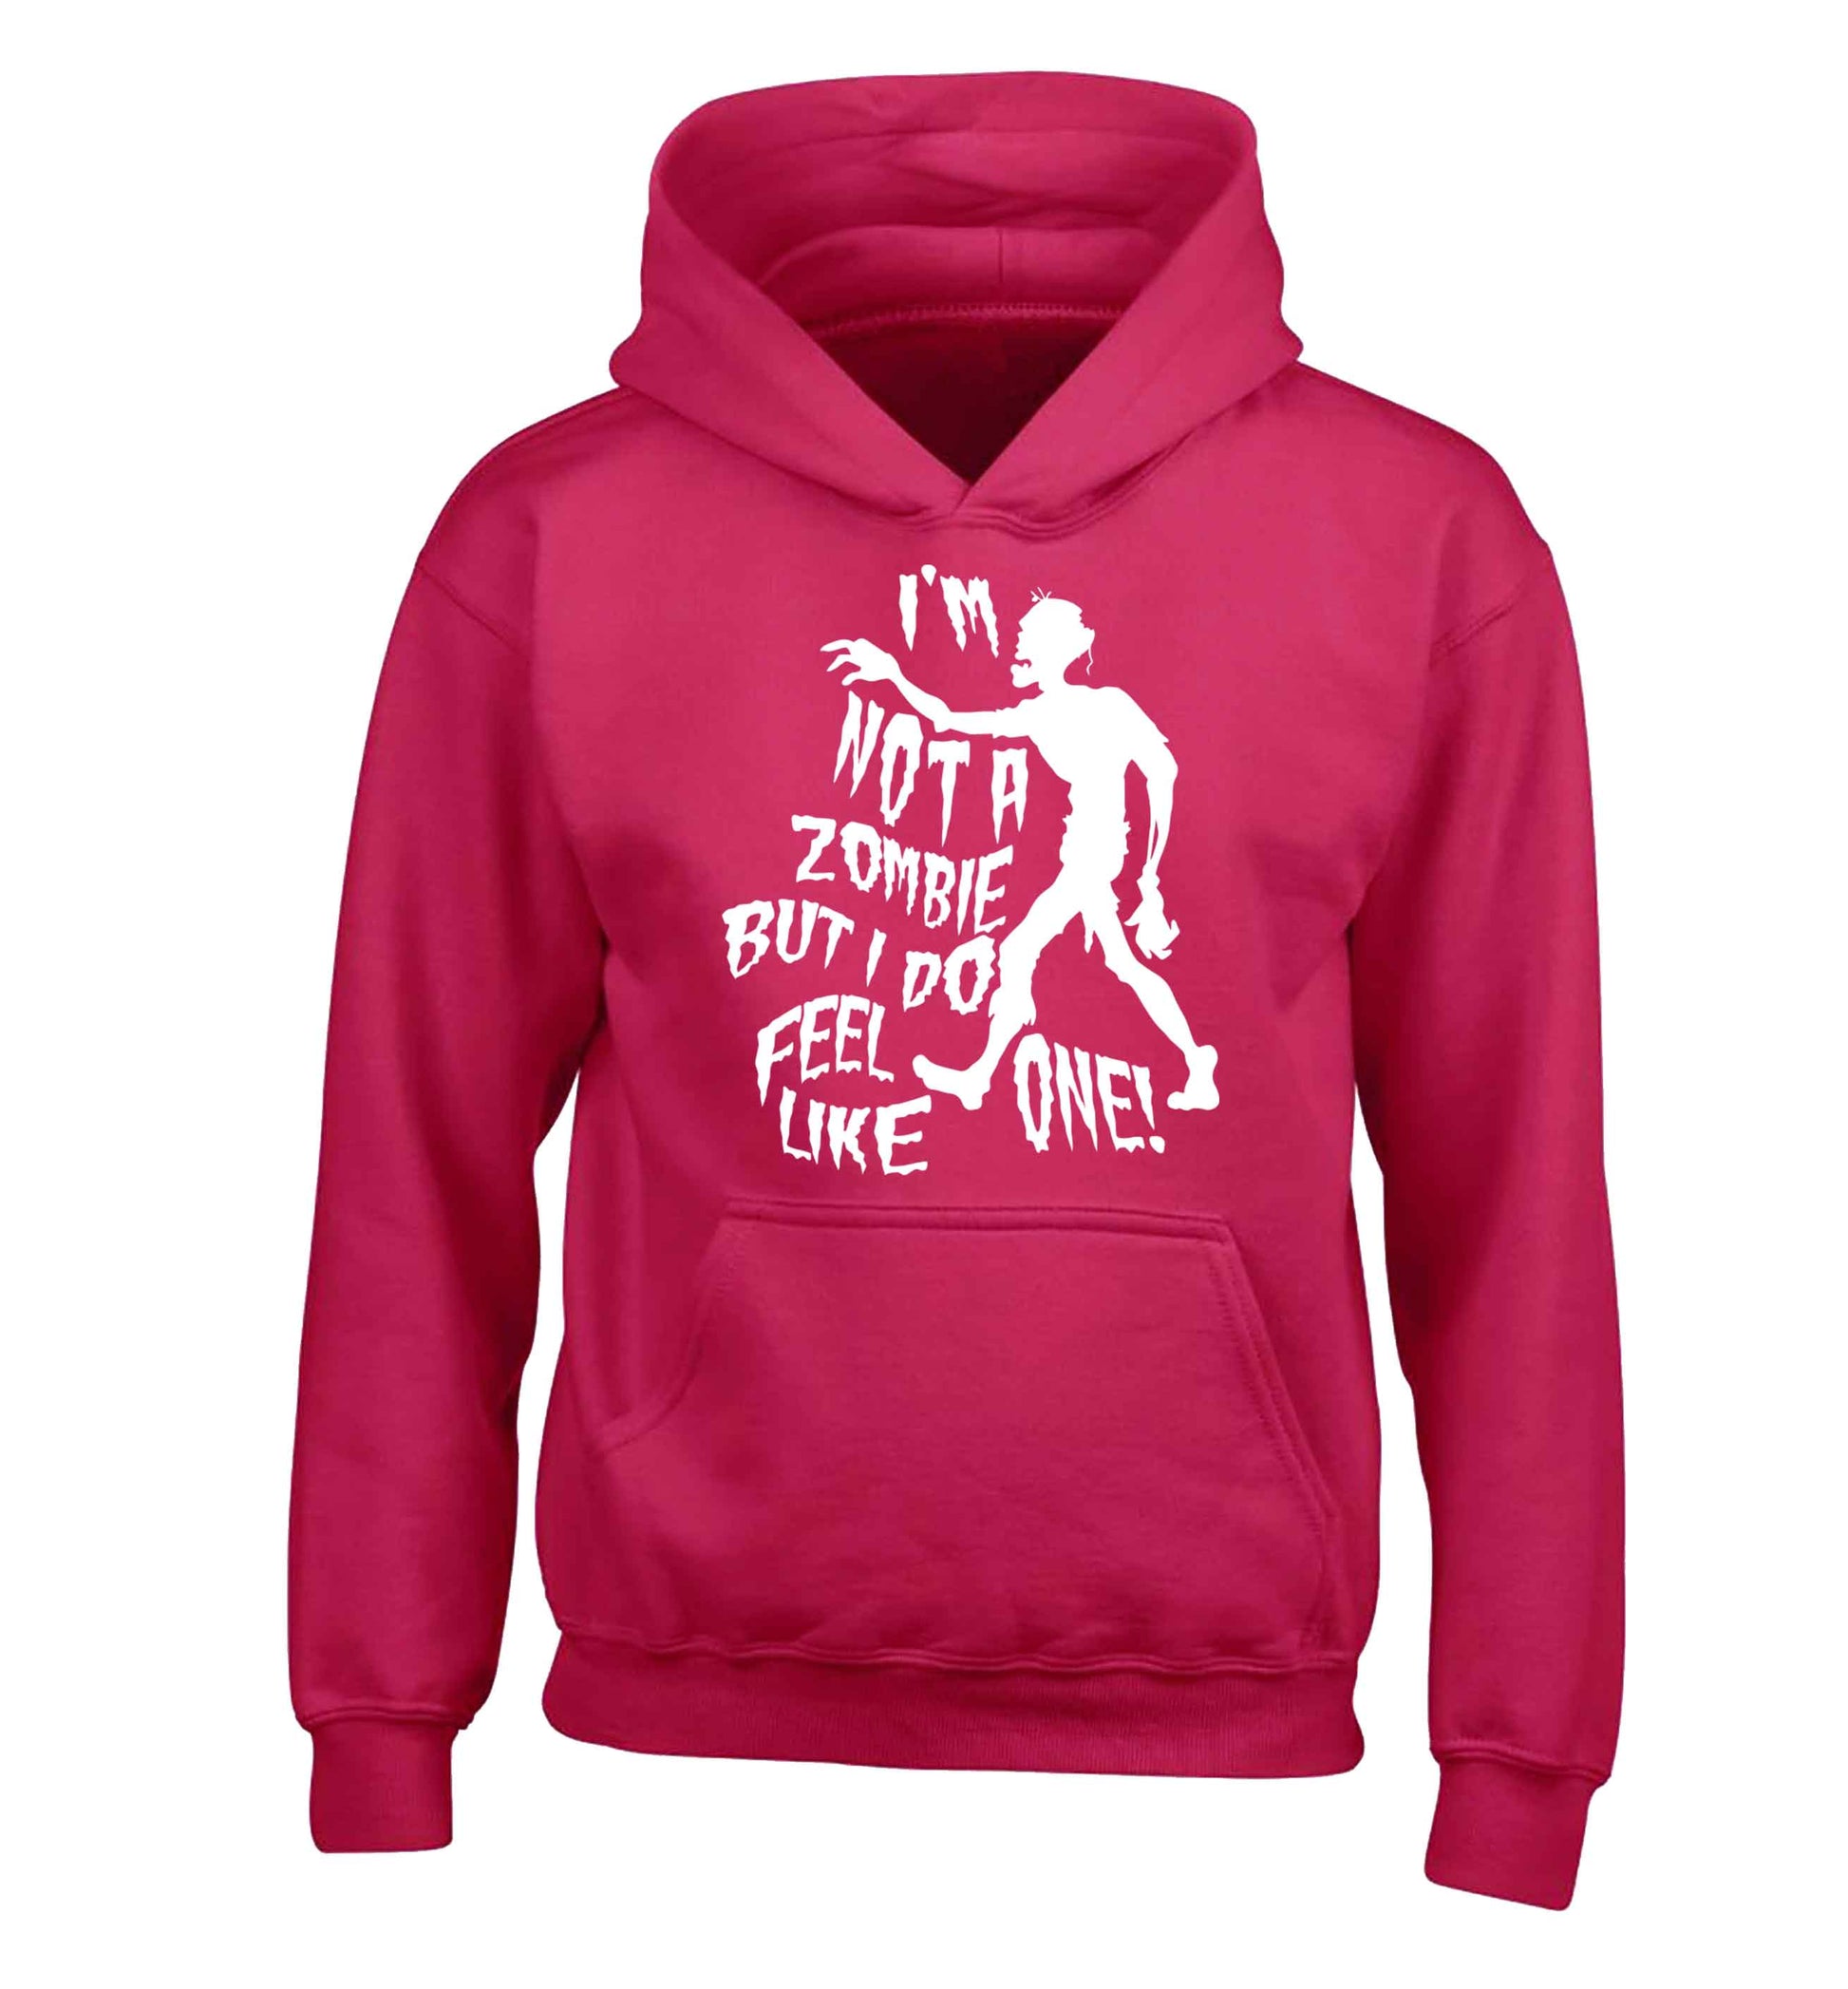 I'm not a zombie but I do feel like one! children's pink hoodie 12-13 Years